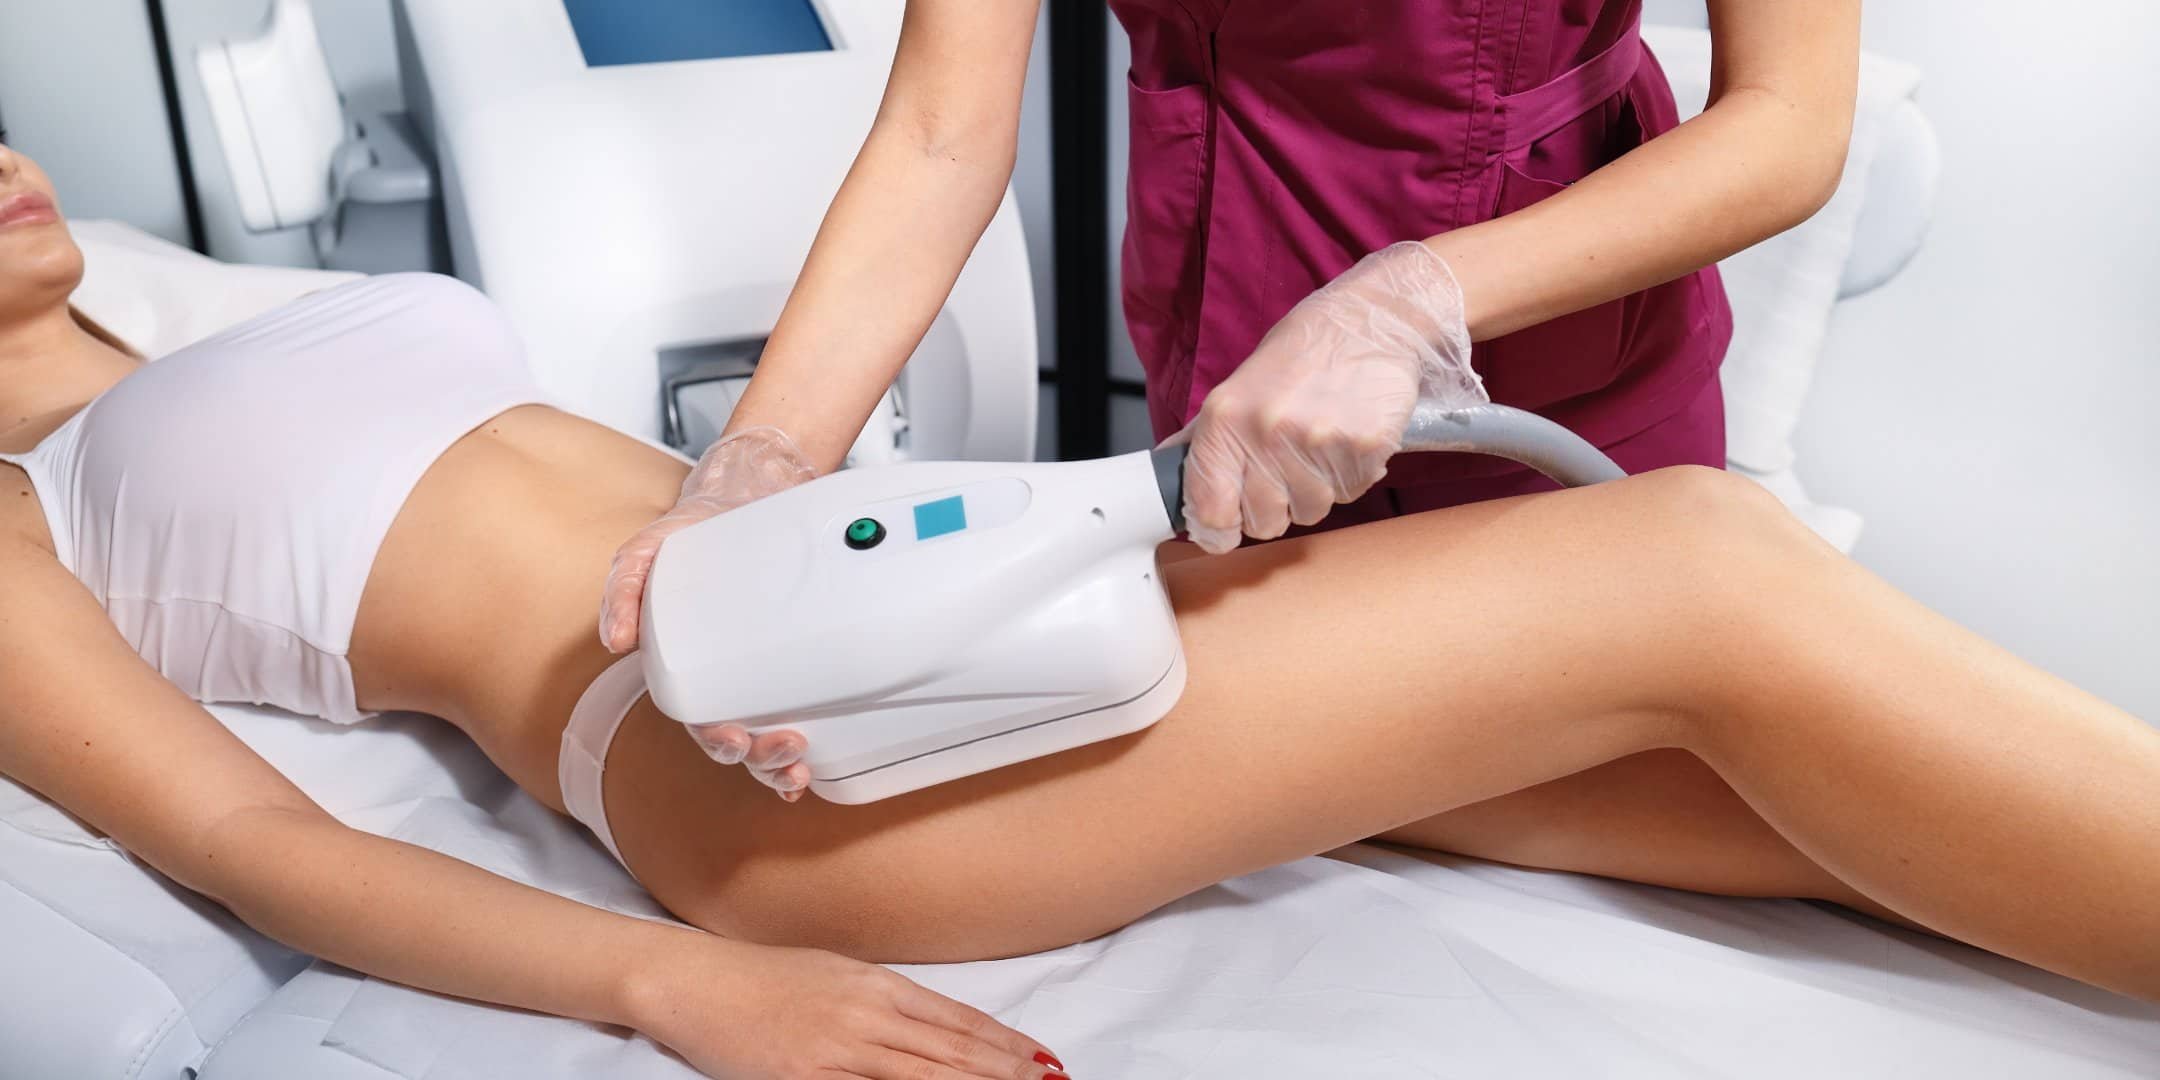 What is Fat freezing or Cryolipolysis treatment?